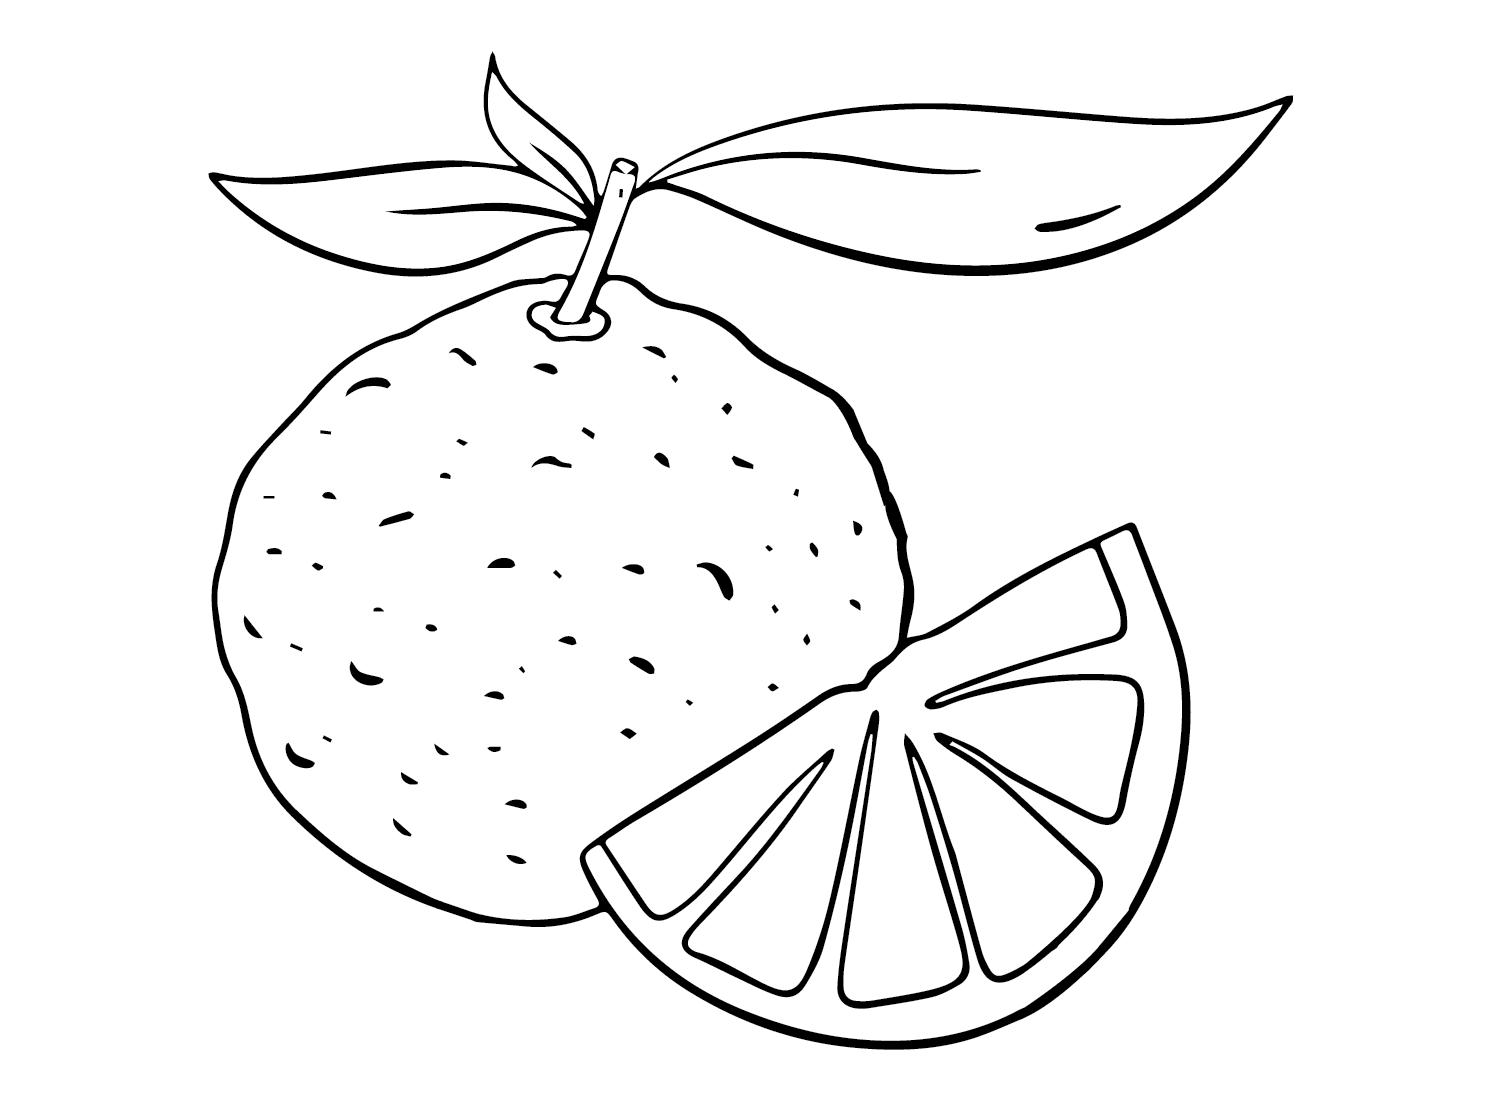 Pomelo Drawing Coloring Page